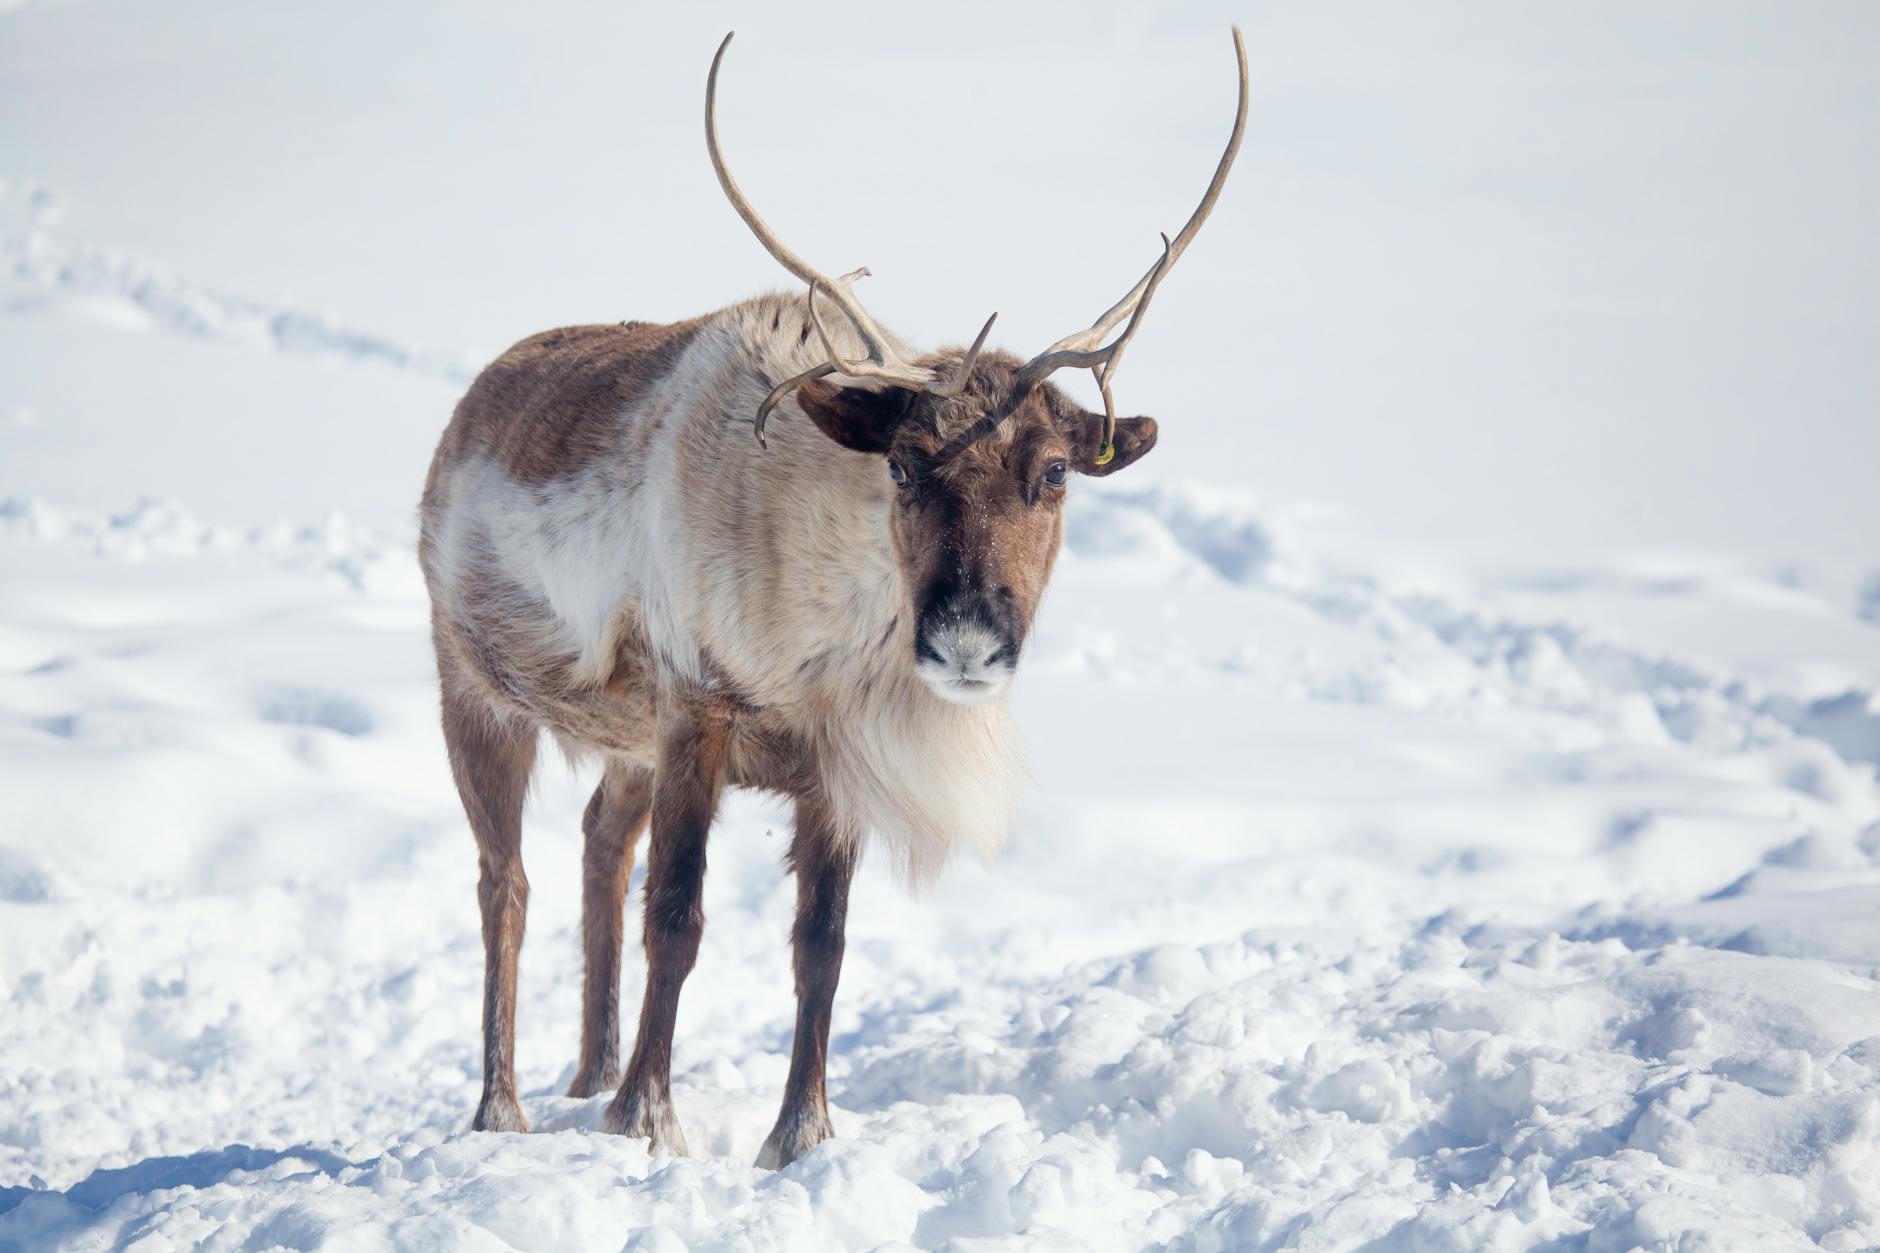 FAQ: What’s the Difference Between Caribou and Reindeer?